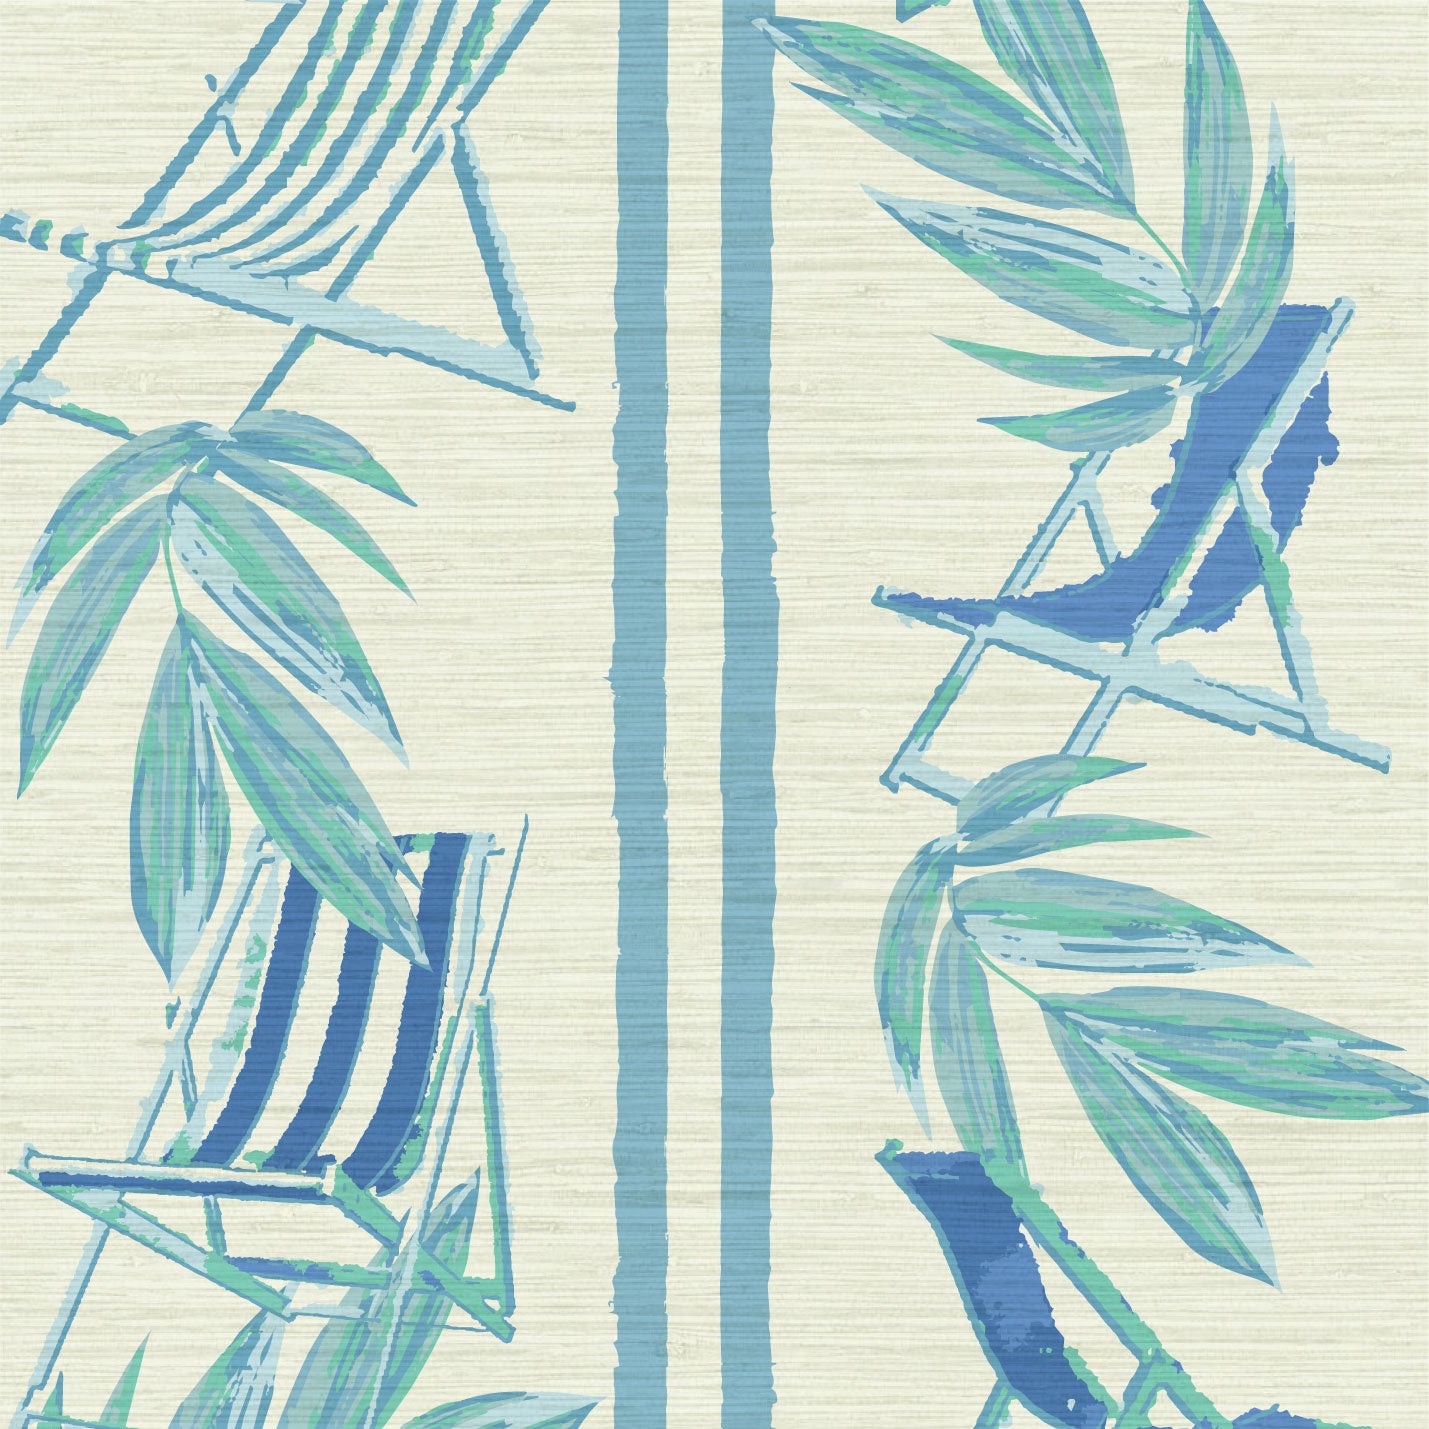 Load image into Gallery viewer, vertical linear grasscloth wallpaper print with a beachy design of blue leaves and stripes paired with shades of blue beach chairs arranged in a vertical oversized stripe Grasscloth Natural Textured Eco-Friendly Non-toxic High-quality  Sustainable practices Sustainability Interior Design Wall covering bold Seaside Coastal Seashore Waterfront Vacation home styling Retreat Relaxed beach vibes Beach cottage Shoreline Oceanfront Nautical
